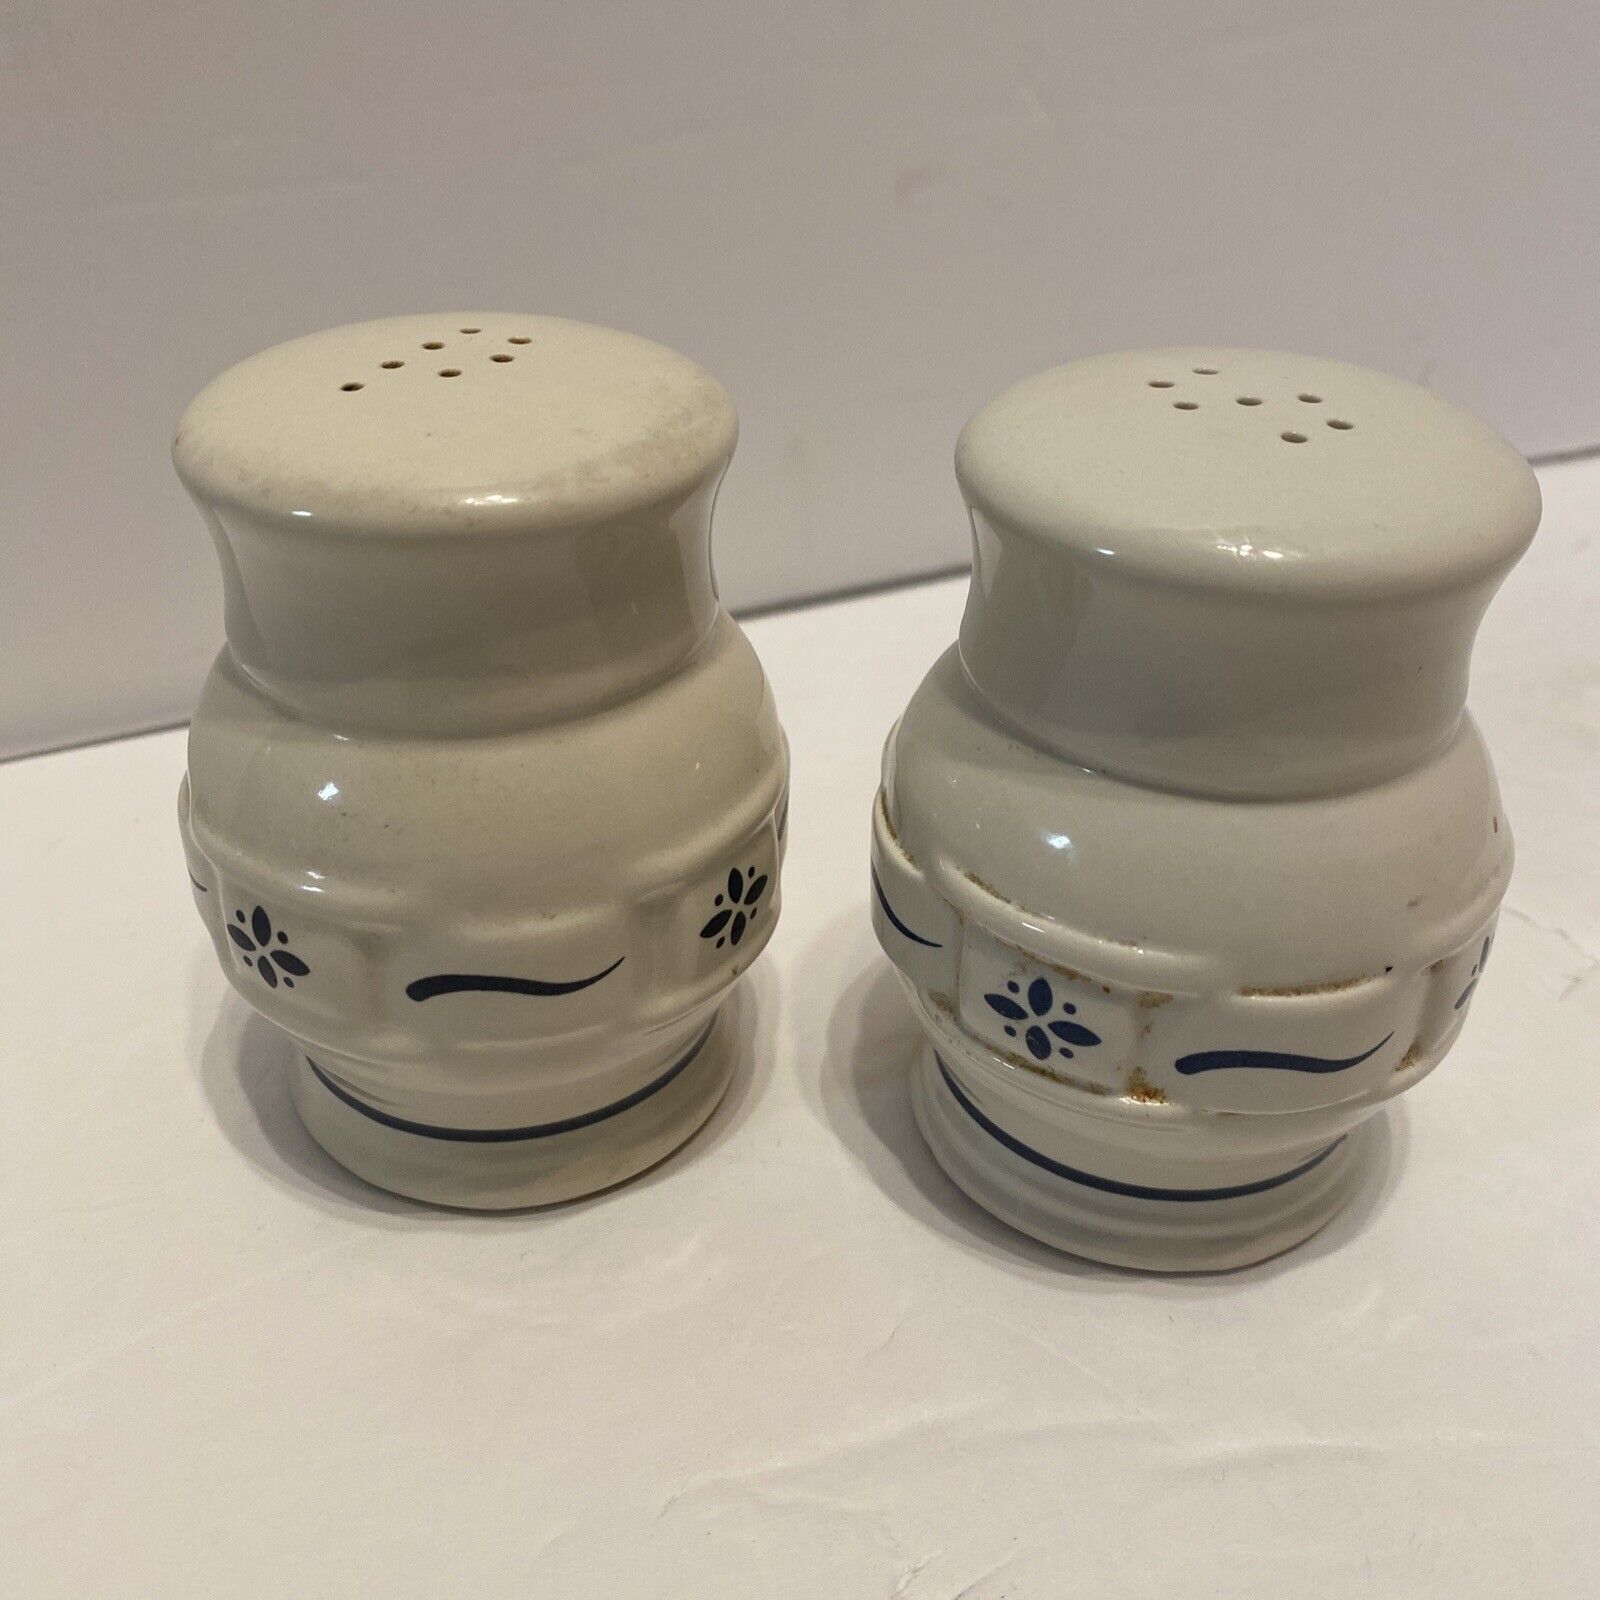 Longaberger Pottery Woven Traditions Blue Salt & Pepper Shakers - Pre-owned